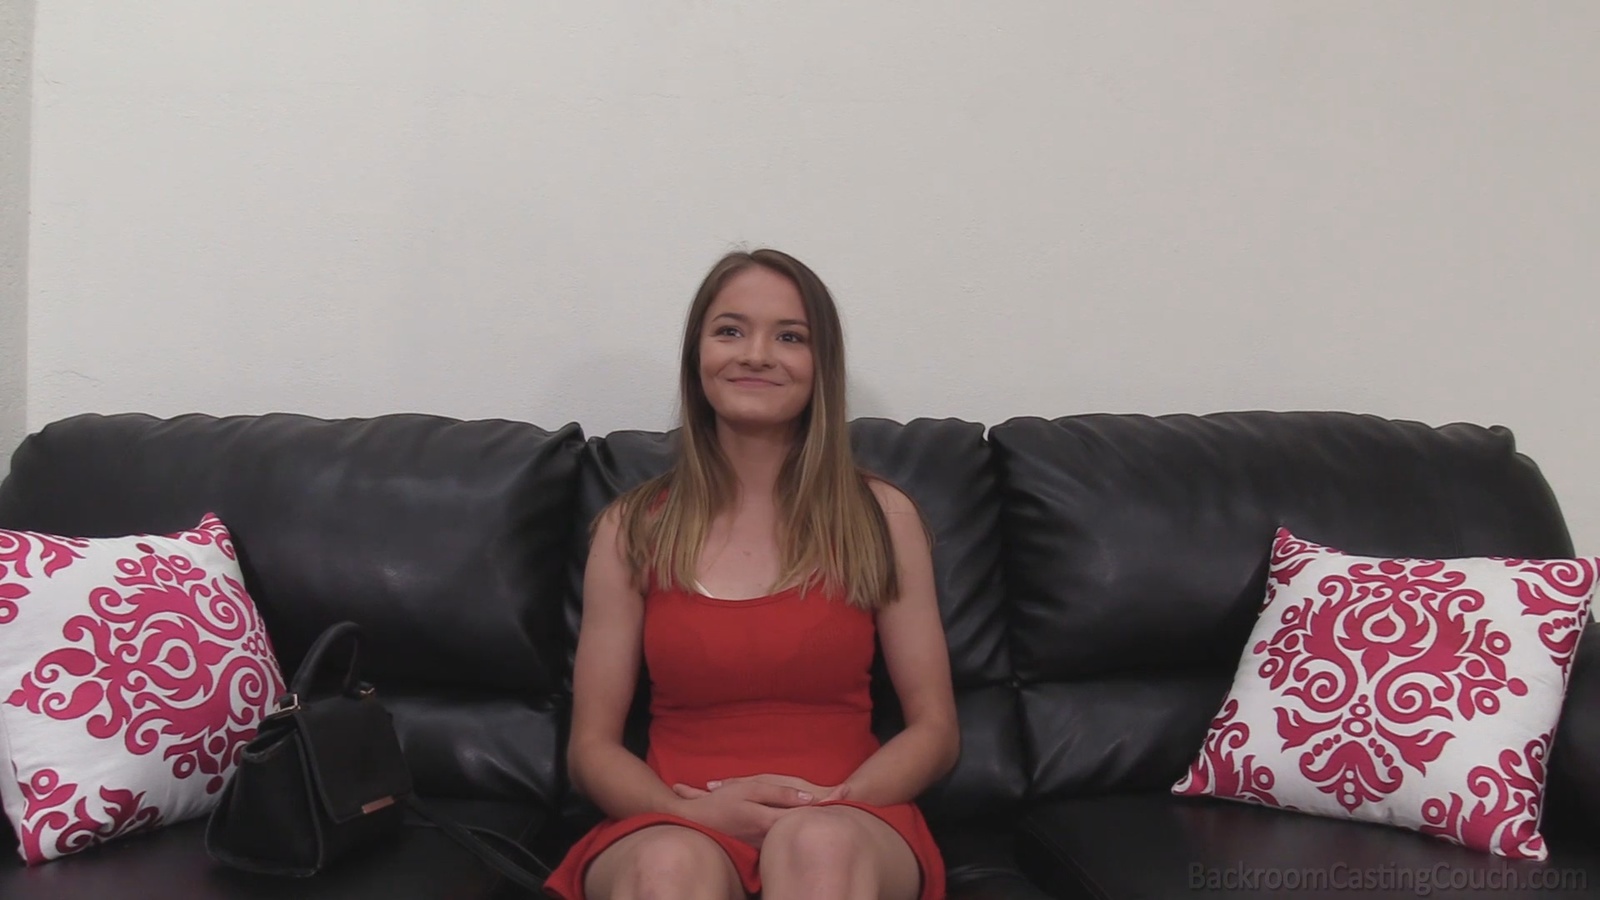 dave merkley recommends Backroom Casting Couch Imagepost